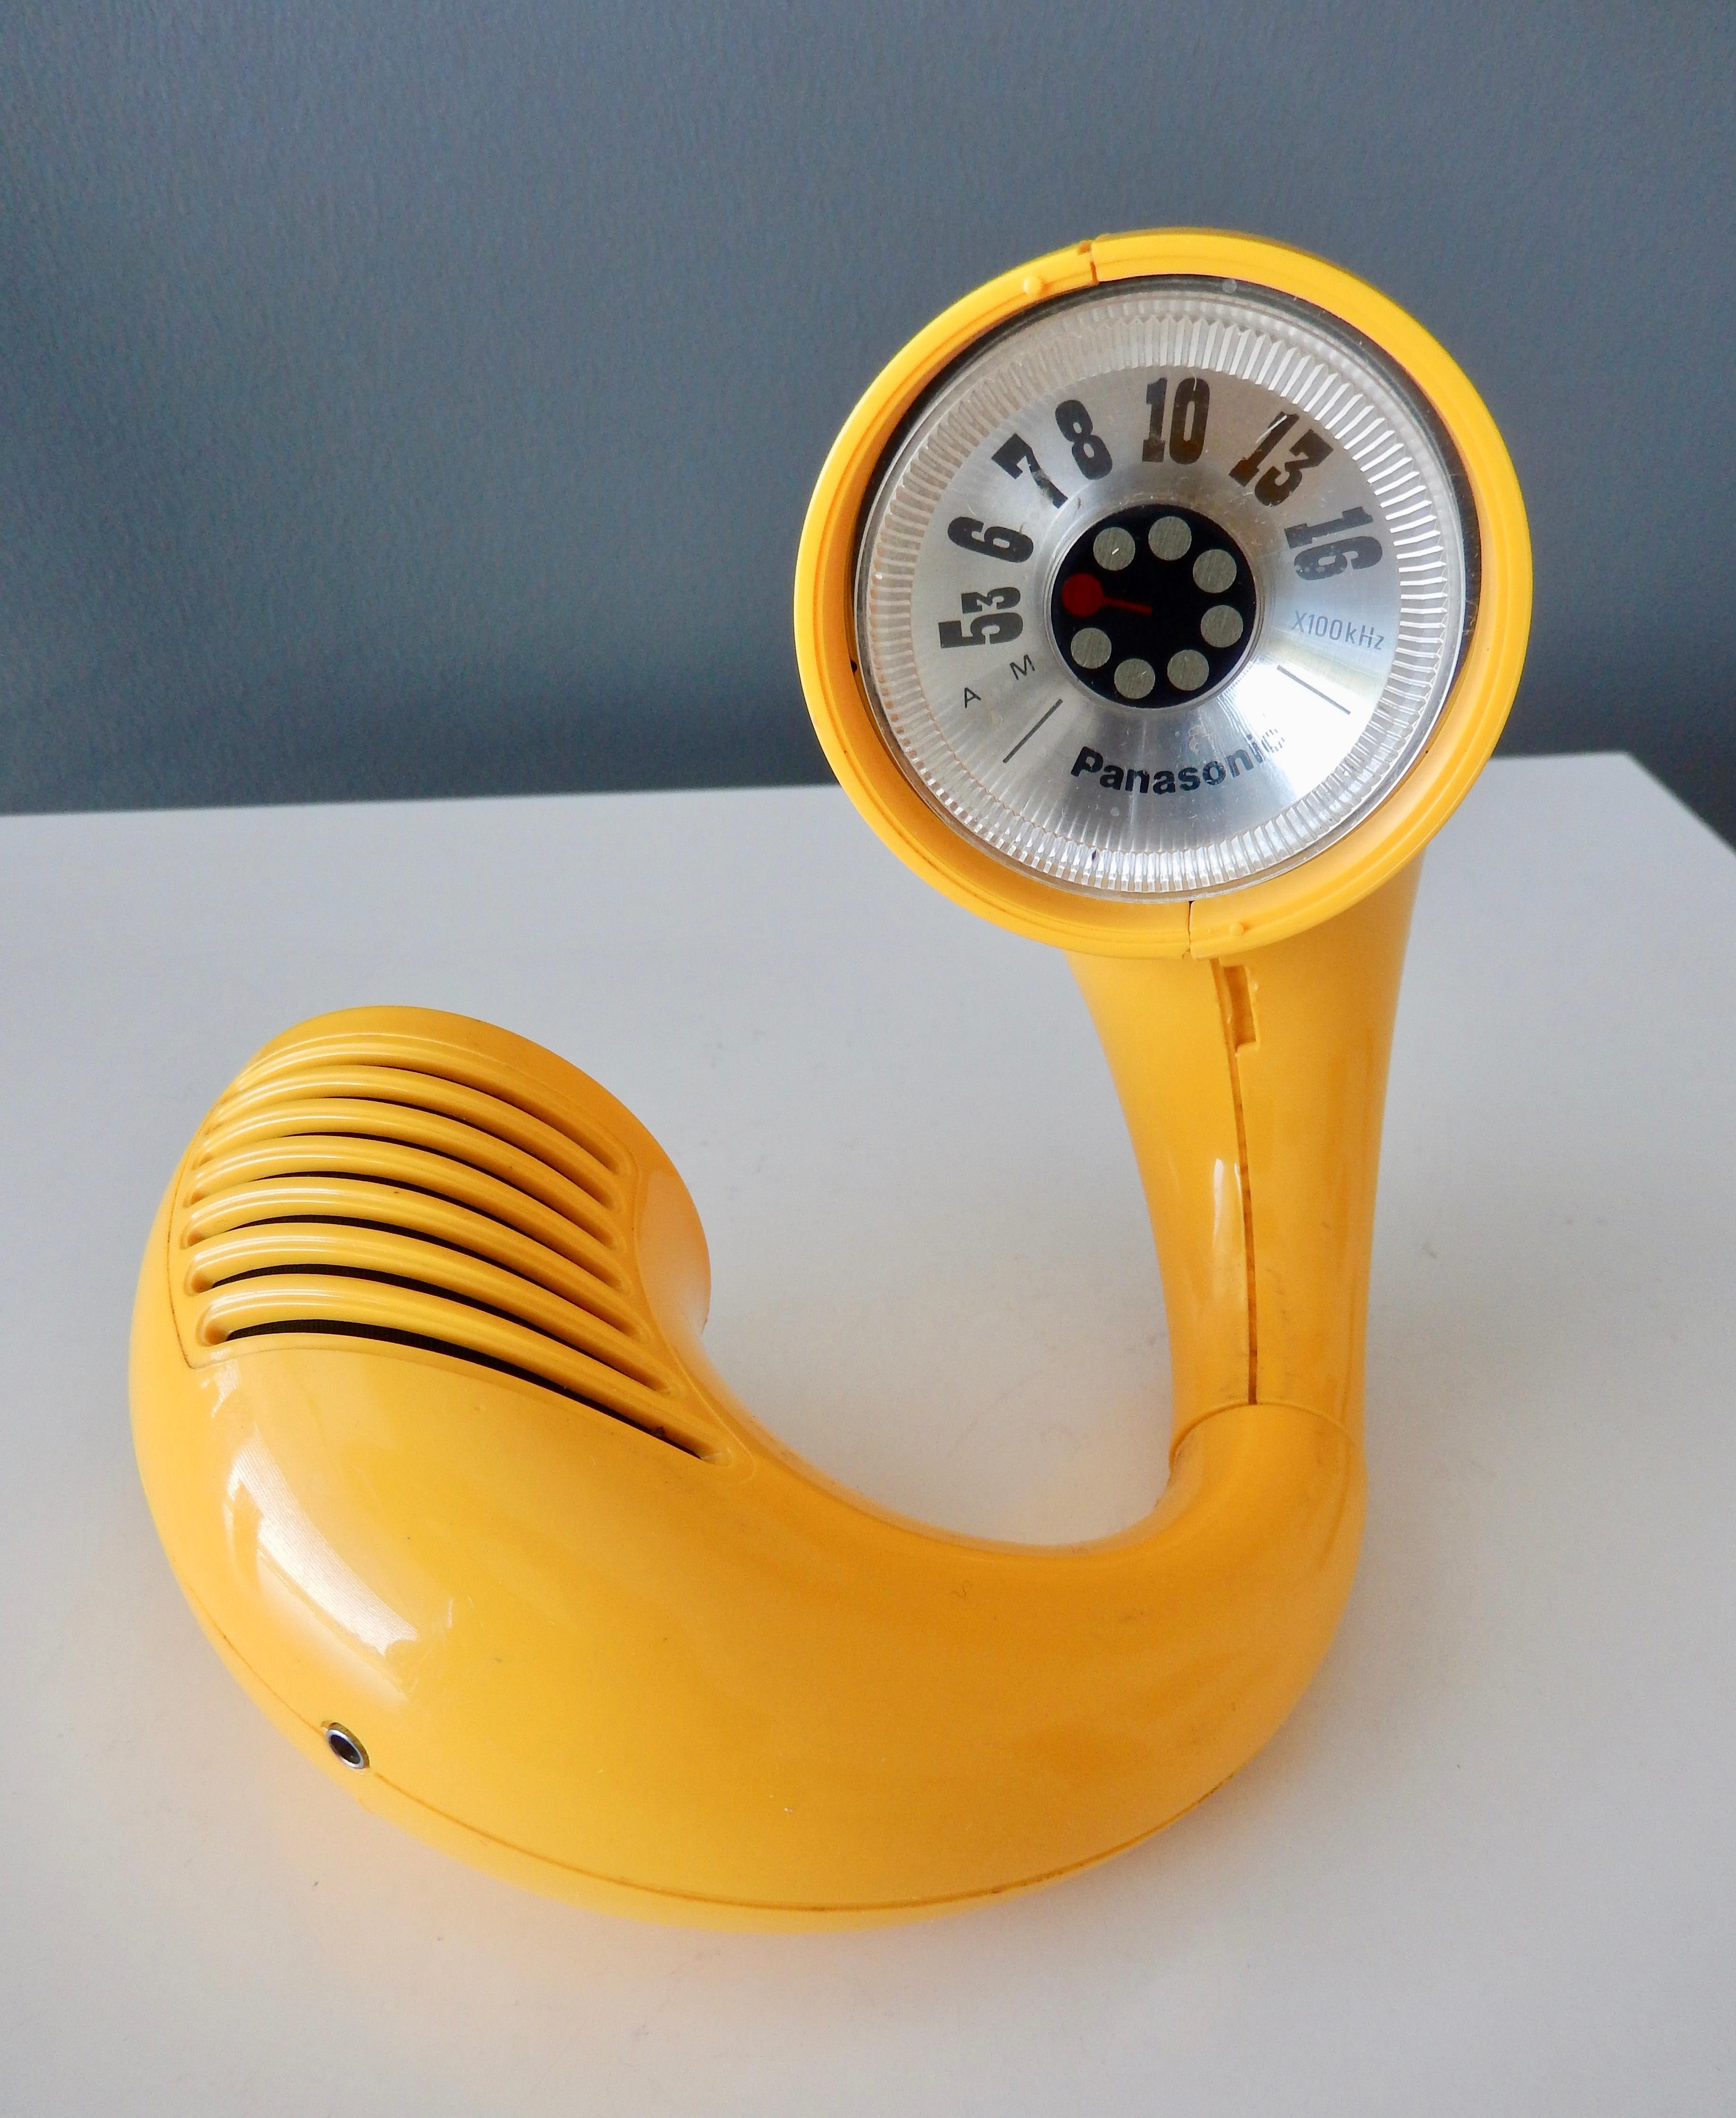 A transistor radio produced by Panasonic, Japan in the early 1970s. Donut shaped, this novelty radio was designed to wear on the wrist. The radio also has a swivel hinge so it can be freestanding . AM reception only. An example of this iconic radio